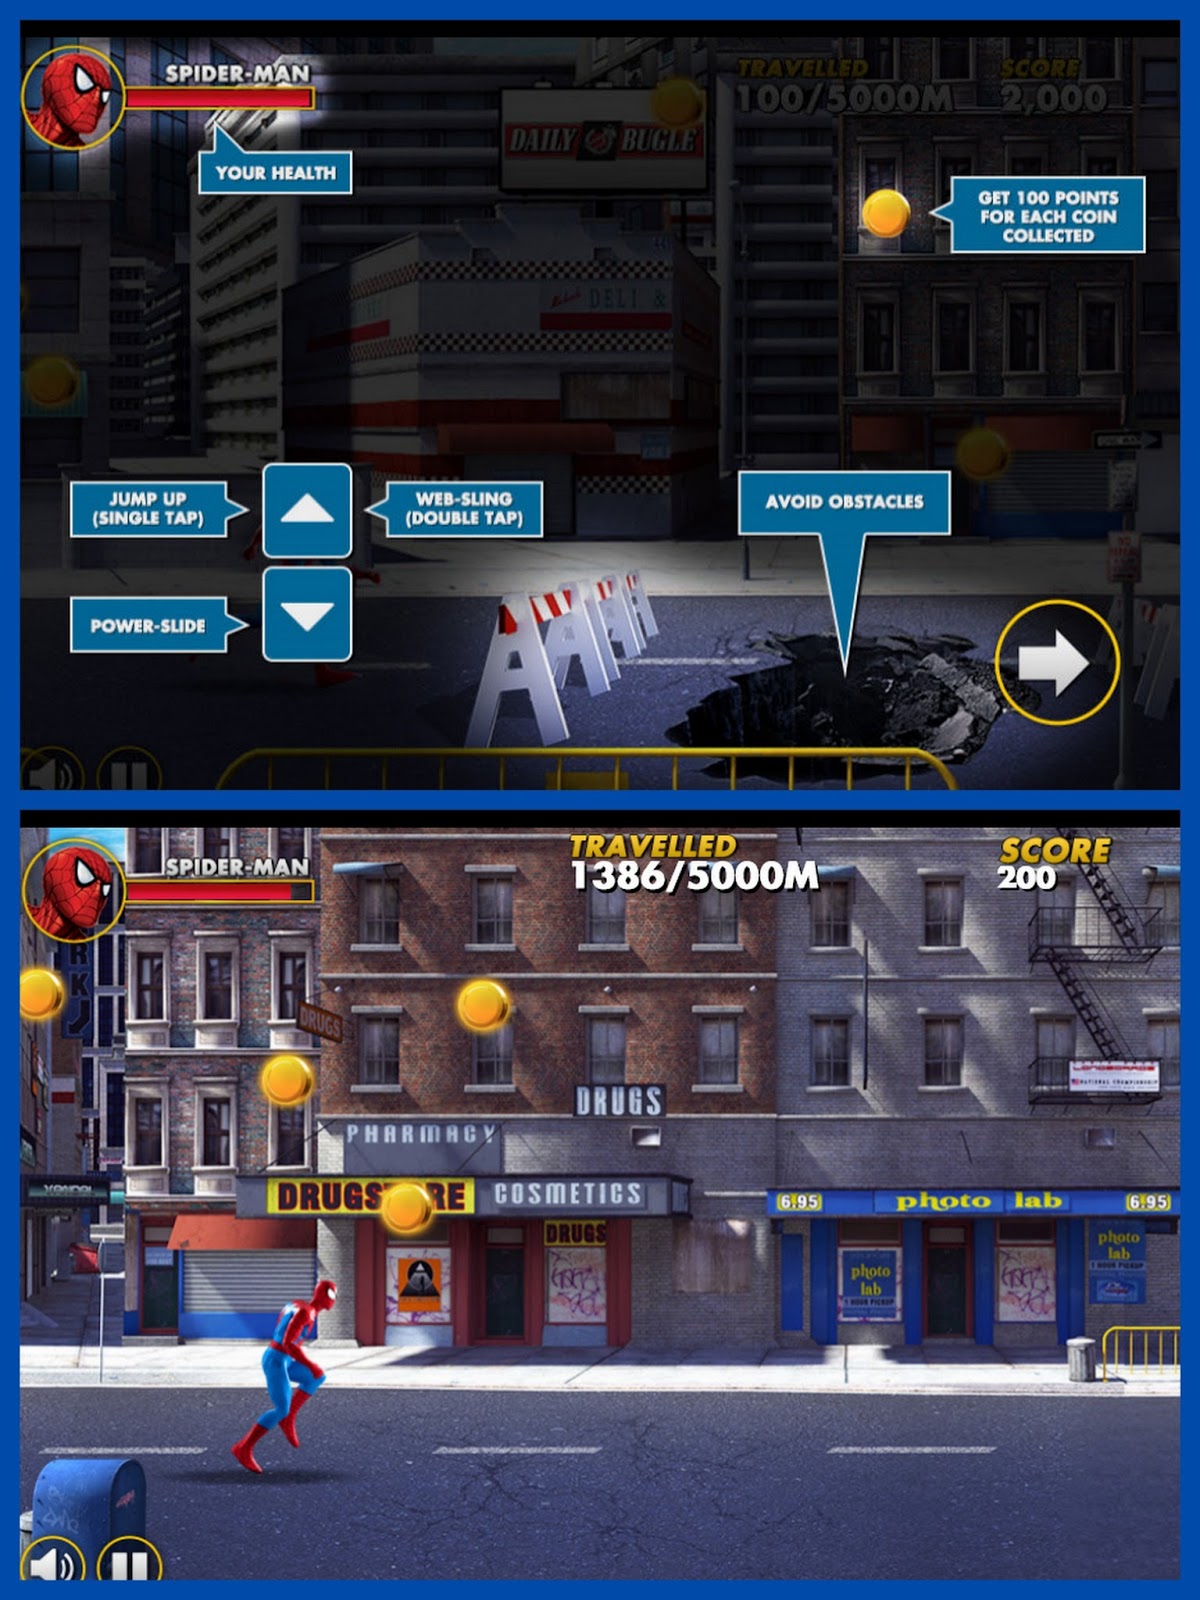 The Brick Castle: Marvel Kids Spiderman Online Free Games Review